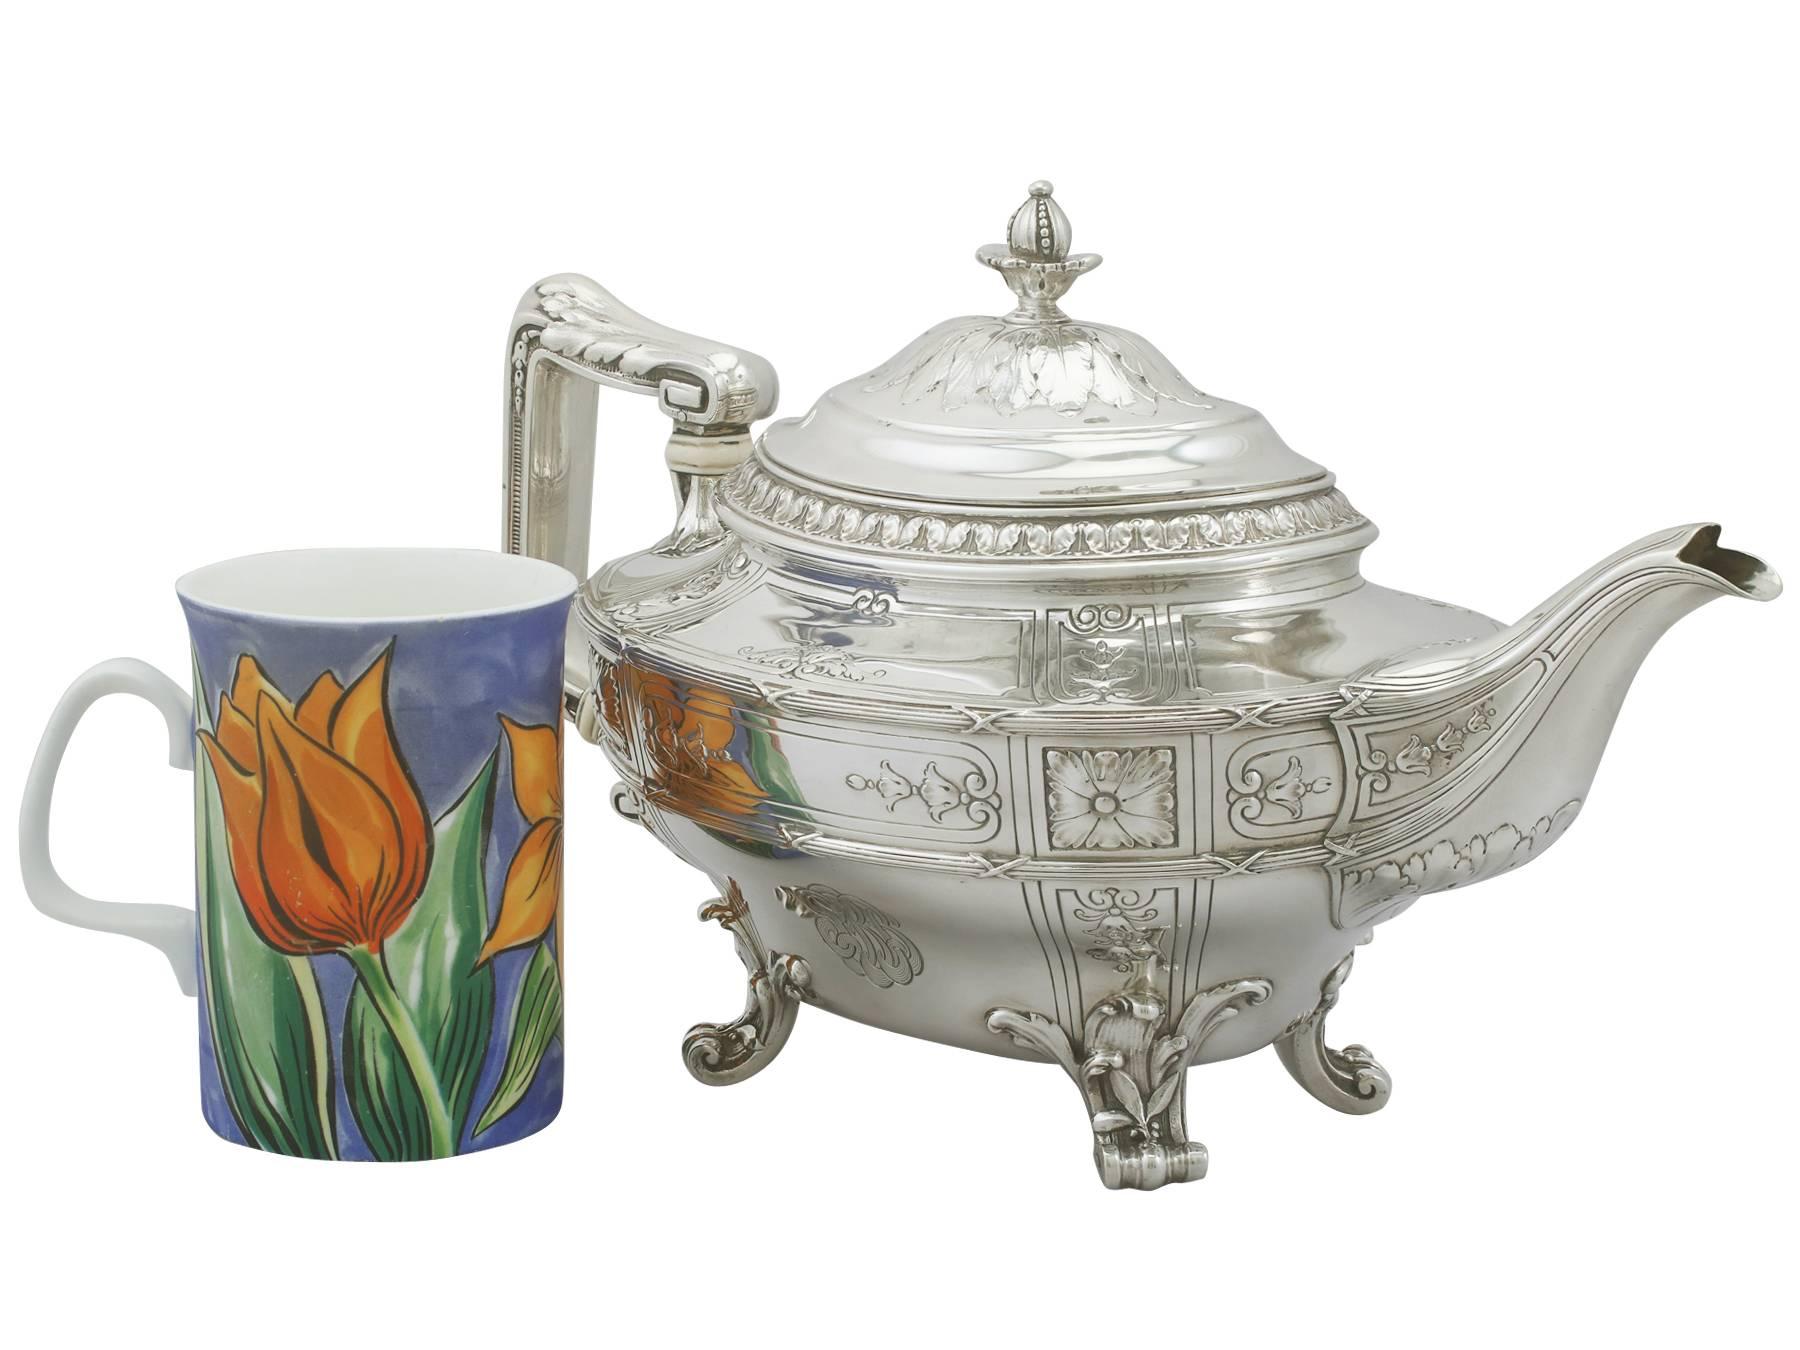 A magnificent, fine and impressive, large vintage American sterling silver teapot by Gorham Manufacturing Company; an addition to our silver teaware collection.

This exceptional antique American sterling silver teapot has an oval shaped